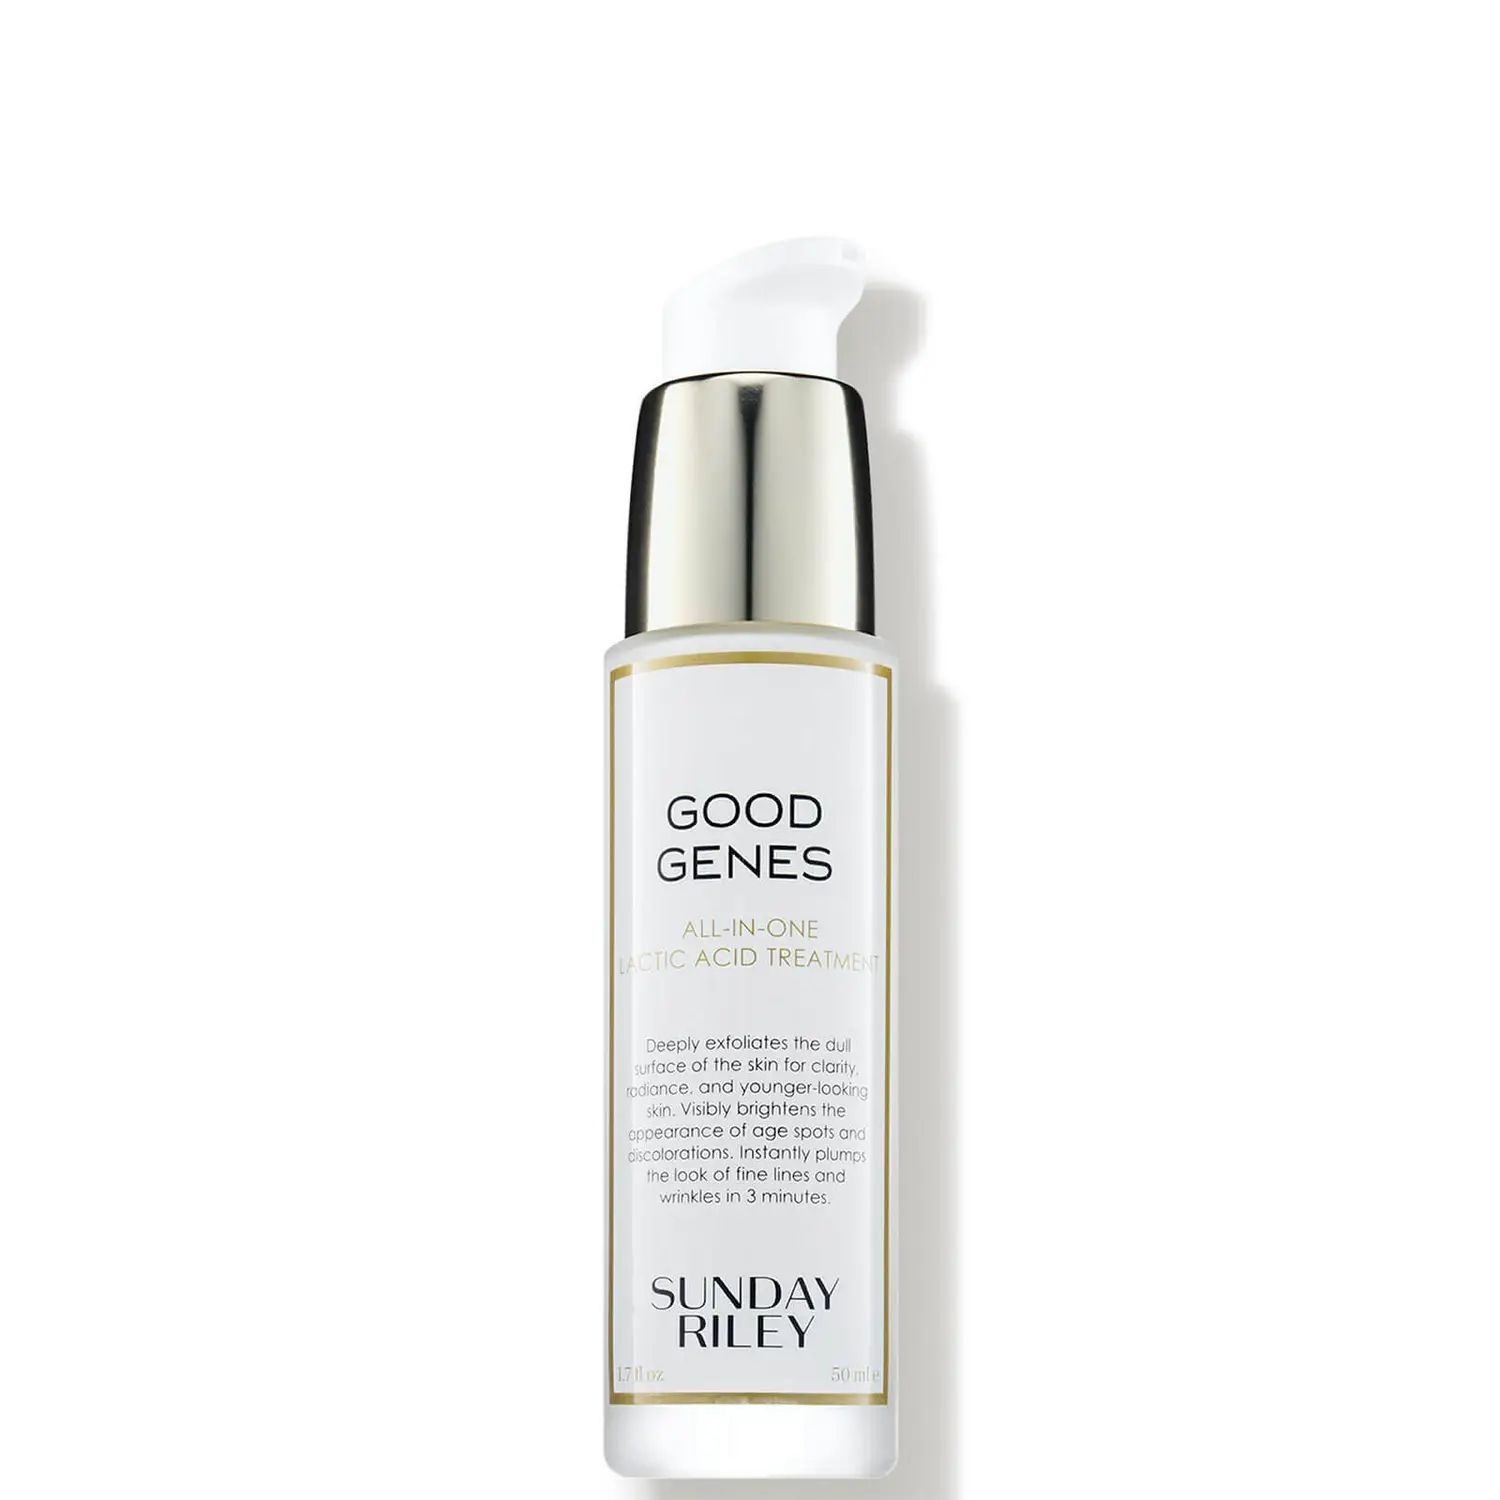 Sunday Riley GOOD GENES All-In-One Lactic Acid Treatment (1.7 oz. - $175 Value) | Dermstore (US)